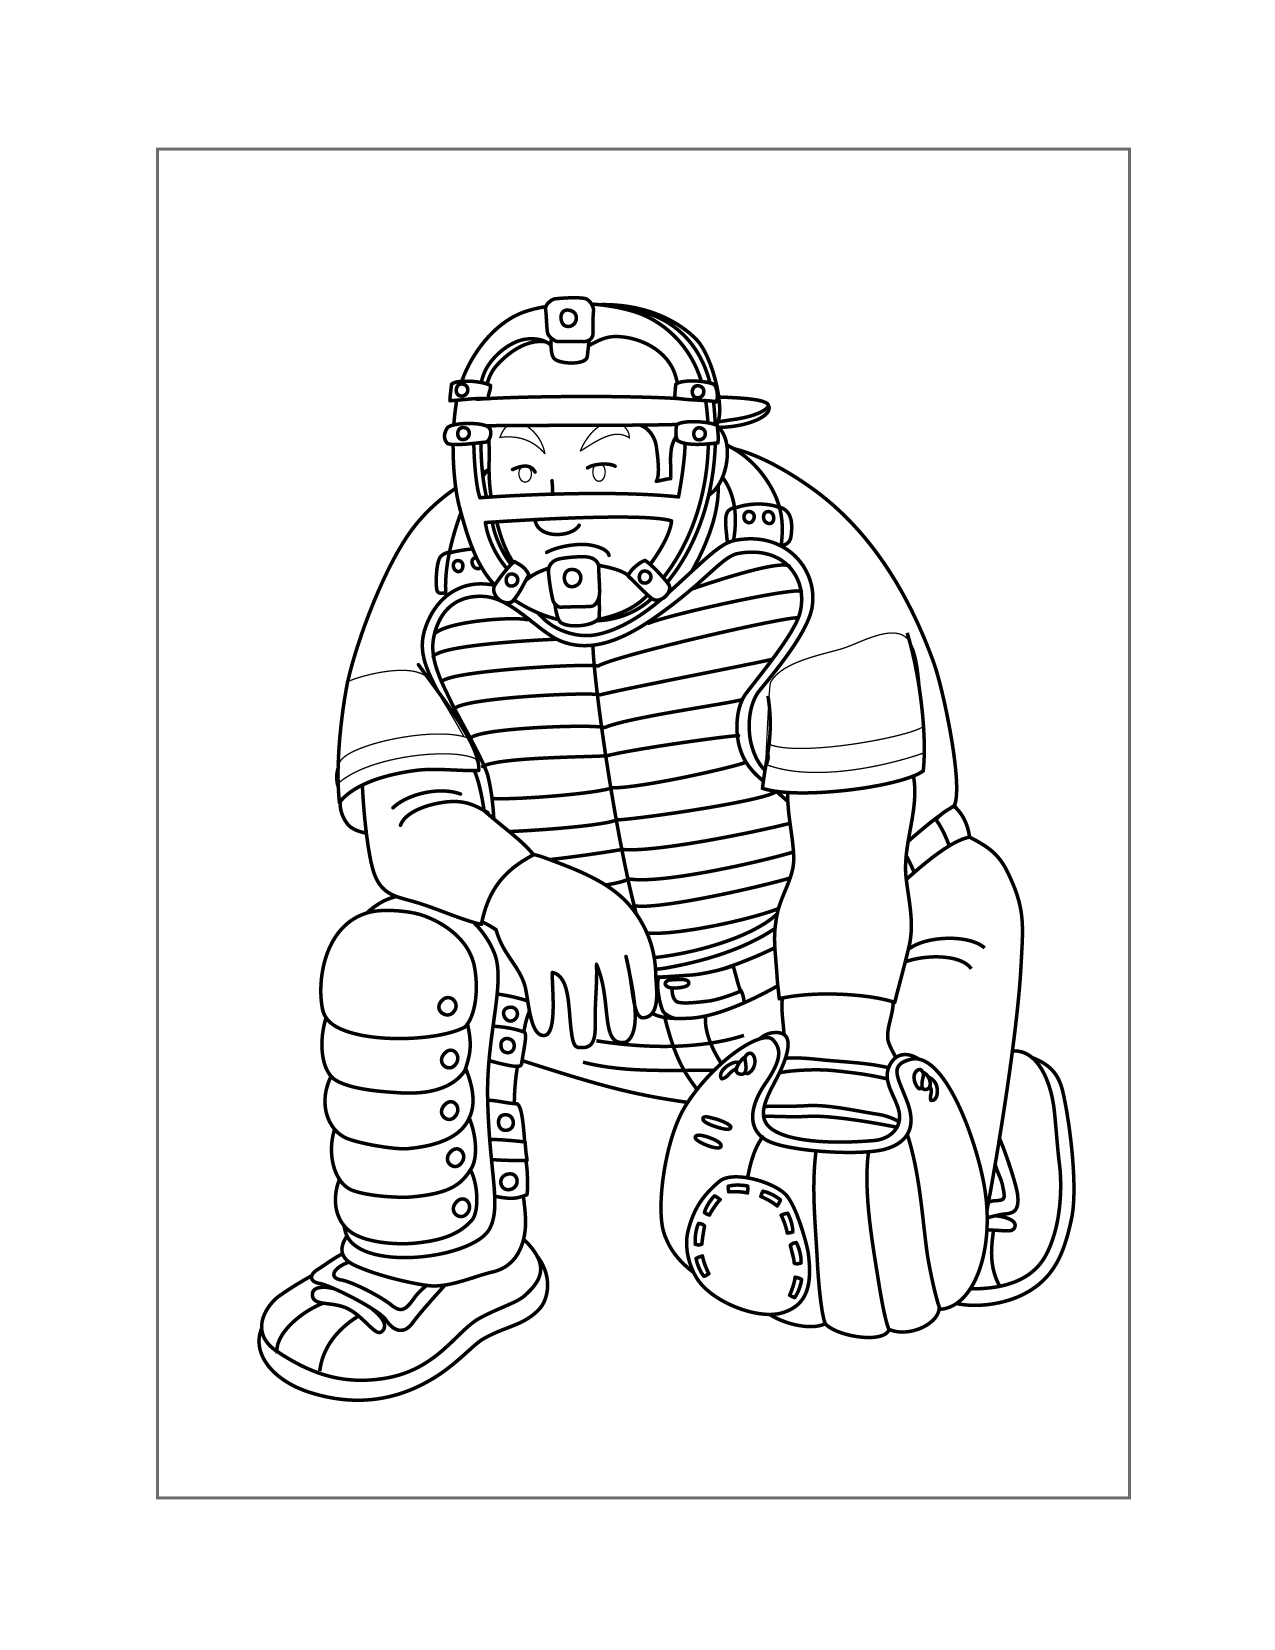 Baseball Catcher Coloring Page